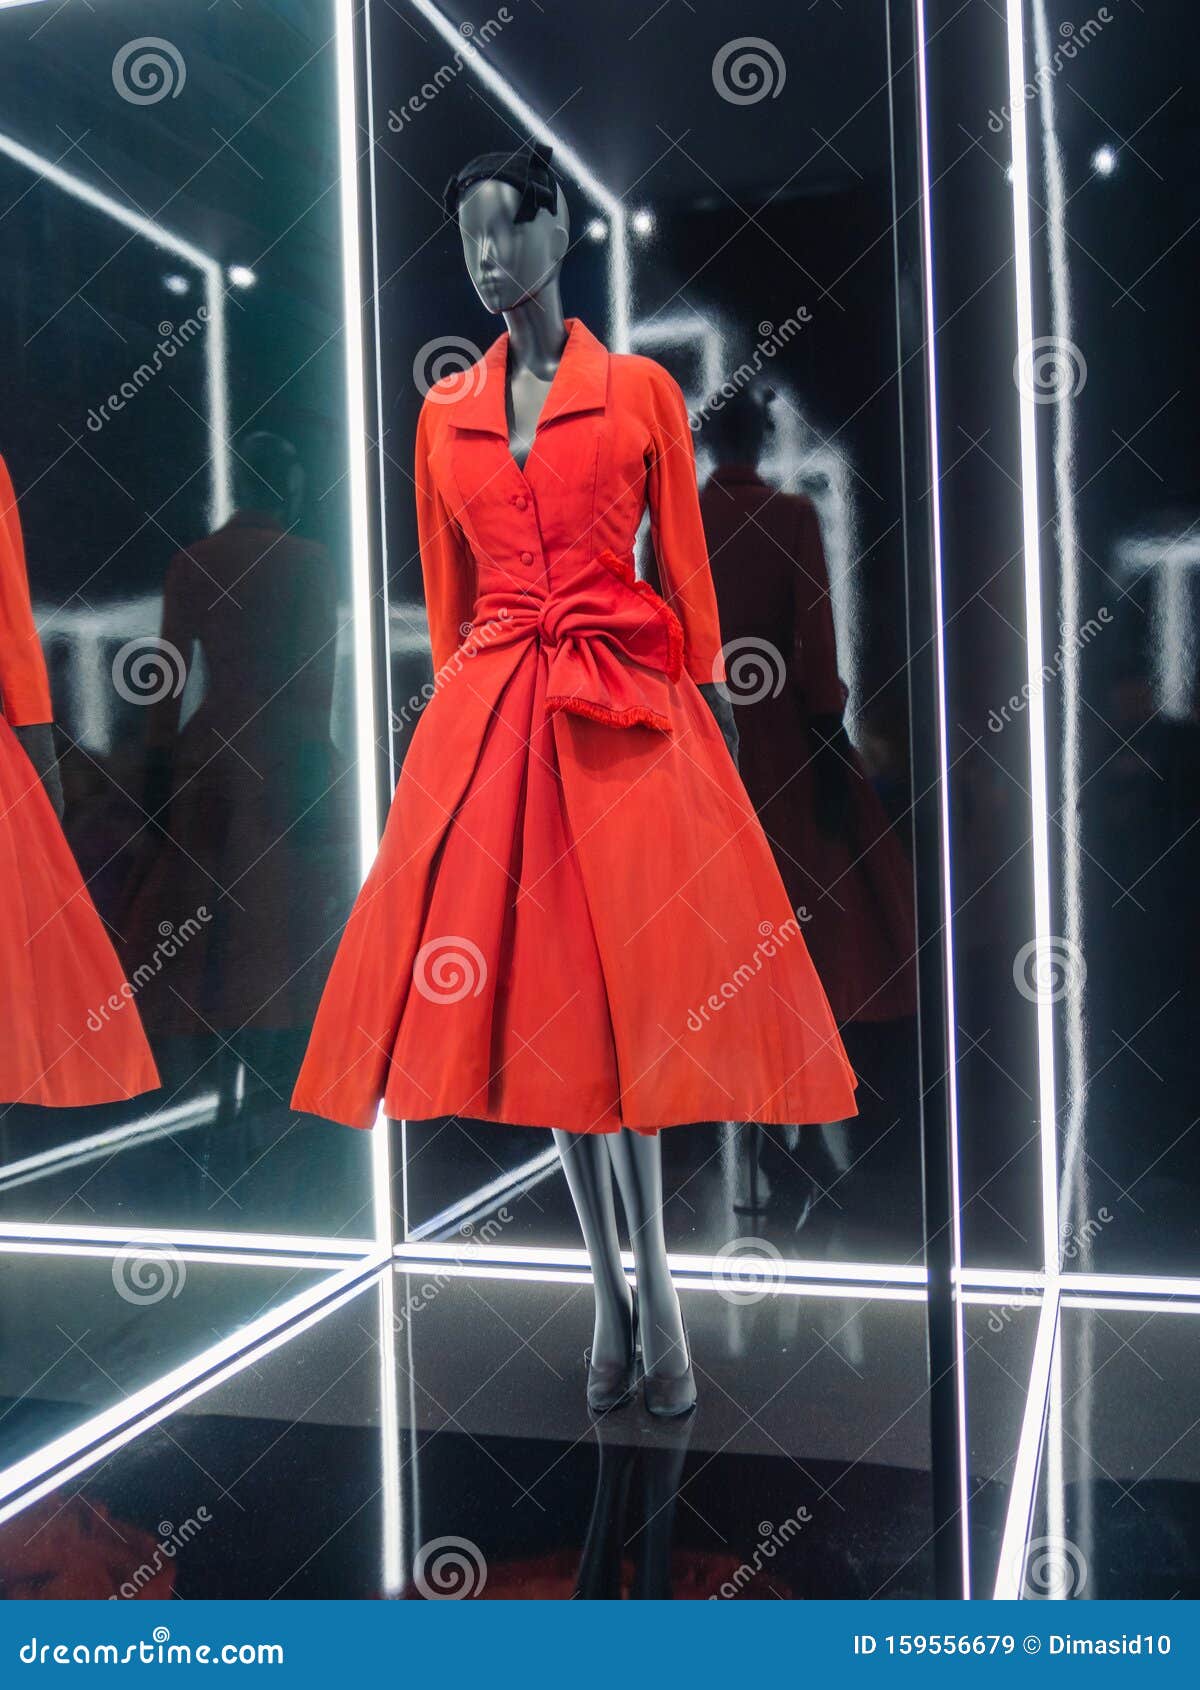 Designer Red Dress by Christian Dior in ...